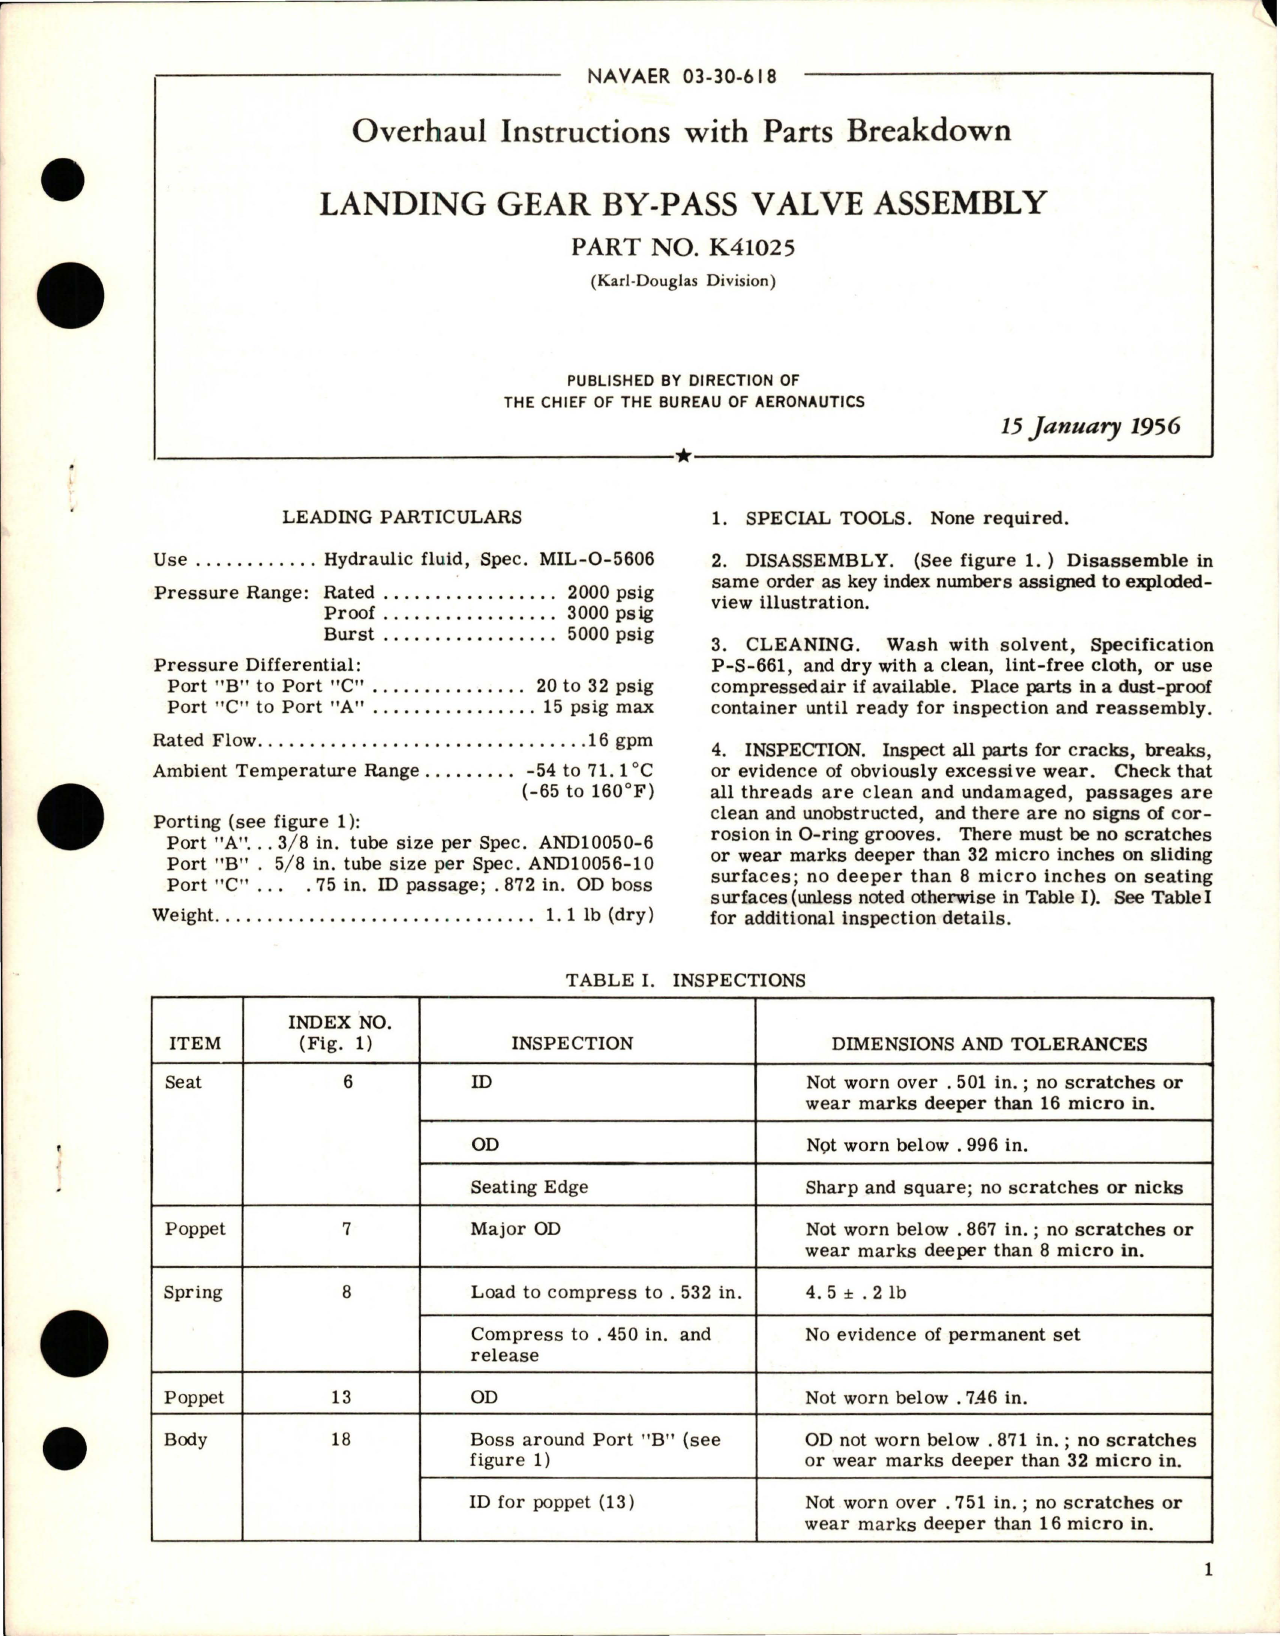 Sample page 1 from AirCorps Library document: Overhaul Instructions with Parts Breakdown for Landing Gear By-Pass Valve Assembly - Part K41025